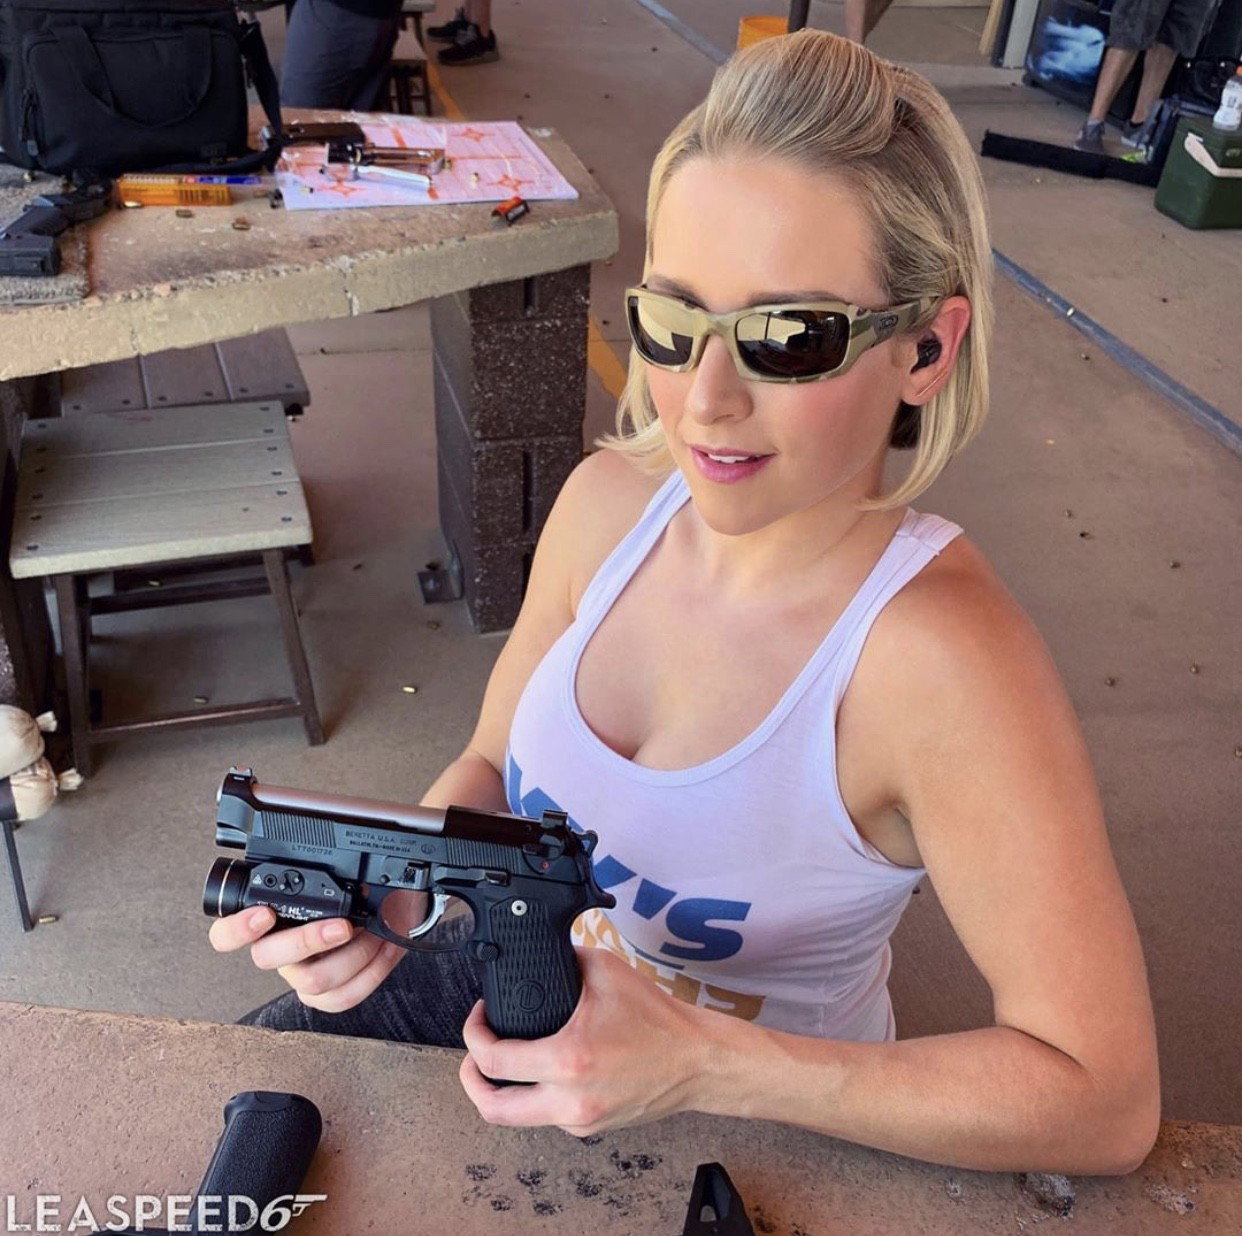 Photo by Senorpunisher with the username @Senorpunisher,  October 1, 2019 at 8:48 AM. The post is about the topic GunsNBabes